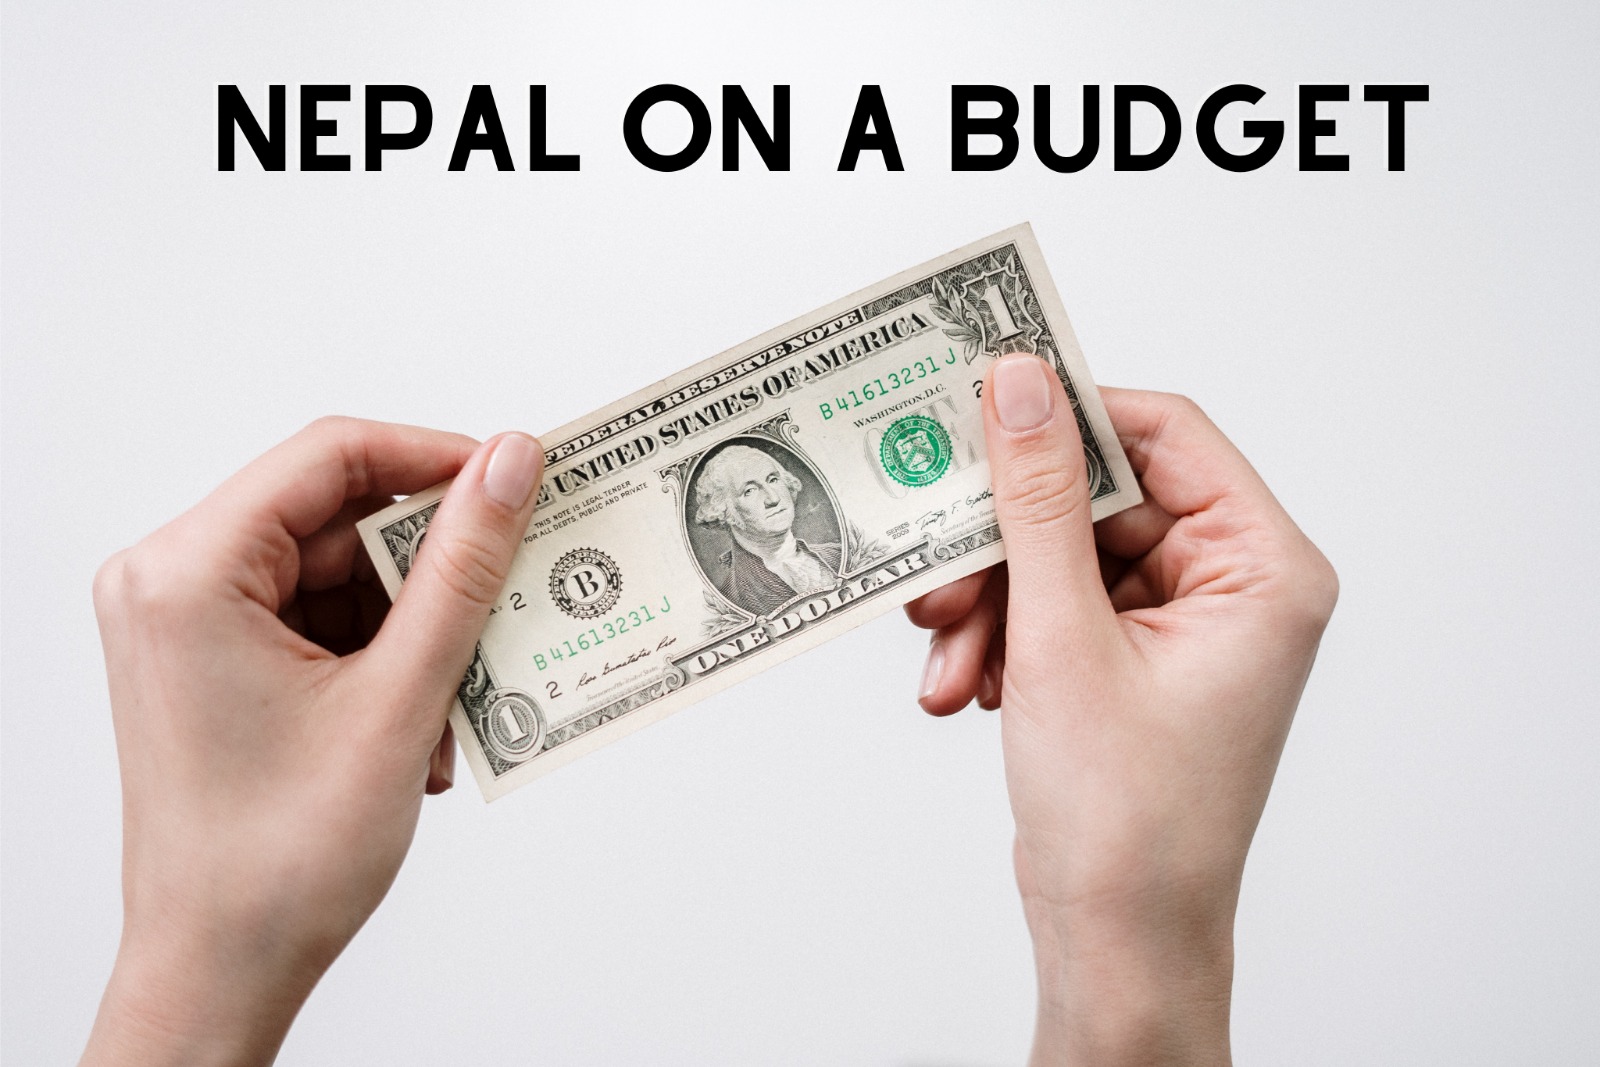 "Traveling to Nepal on a Budget: Tips and Tricks for Traveling Affordably"